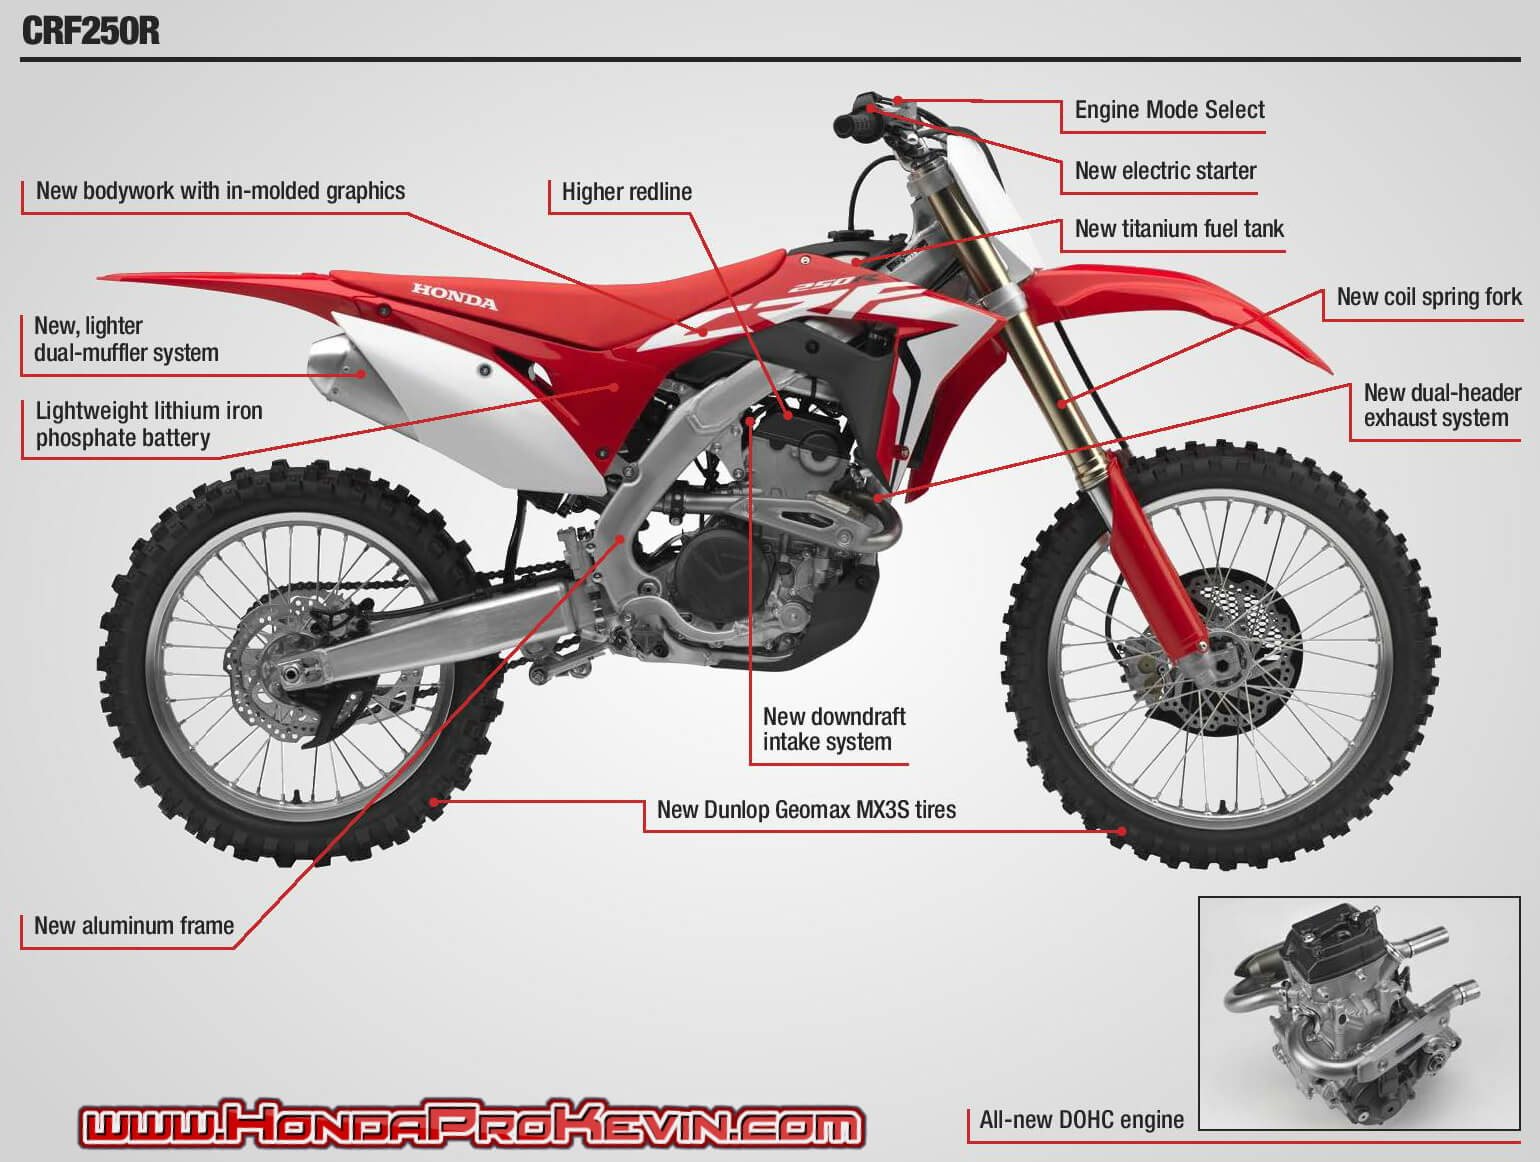 Honda CRF250R Review / Specs + Features Explained | Motorcycle / CRF Dirt Race Bike